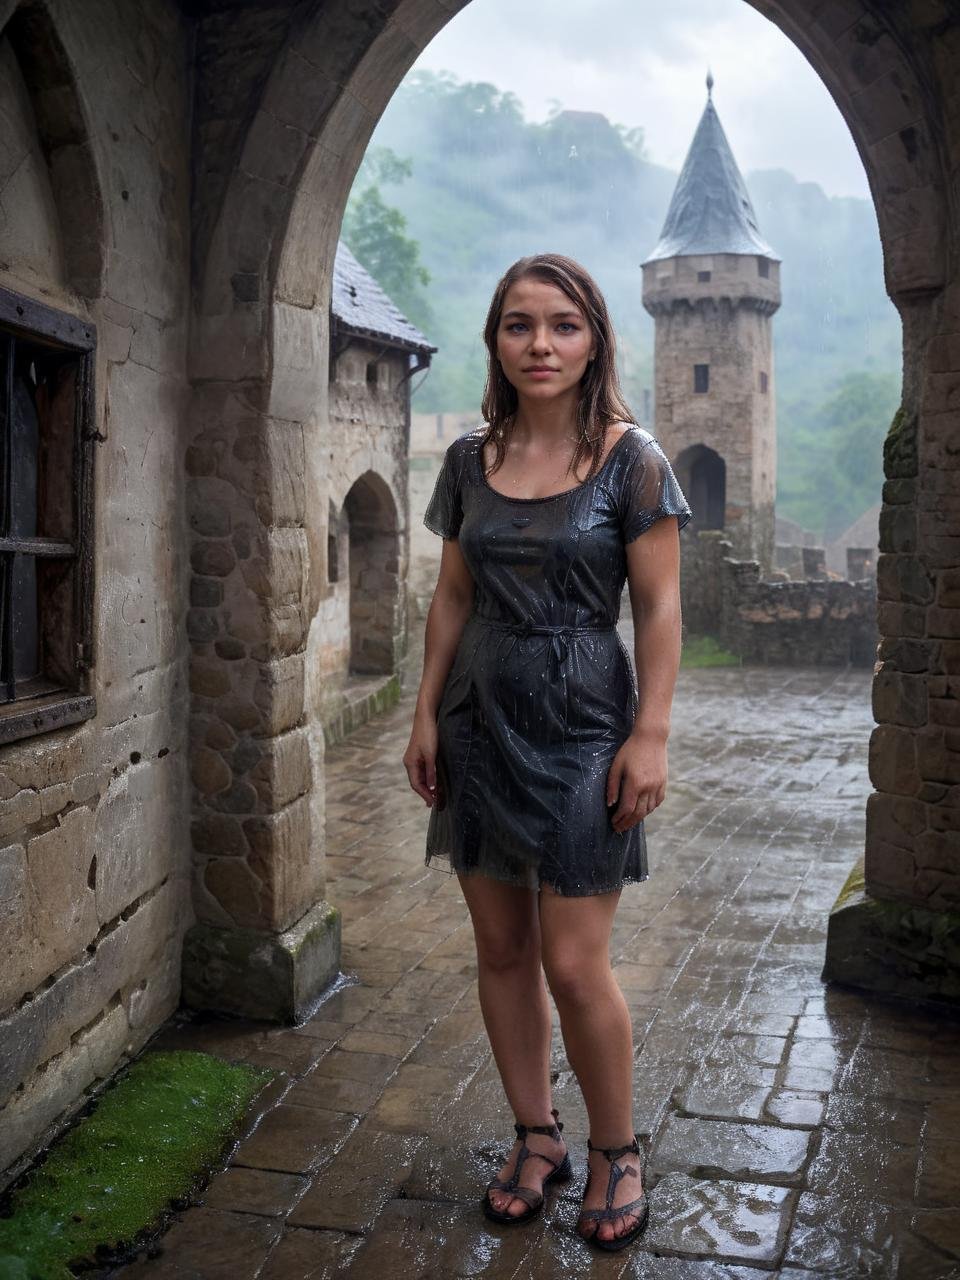 Hyperrealistic art beautiful cute 28 y.o. Vala woman is standing castle's courtyard, wearing wet transparent dress,  manorhouse, old castle, stone walls, rain,   <lora:polyhedron_god rays-000007:0.6>  <lora:Castle_manor:0.8>  <lora:Vanilka:0.9> . Extremely high-resolution details, photographic, realism pushed to extreme, fine texture, incredibly lifelike